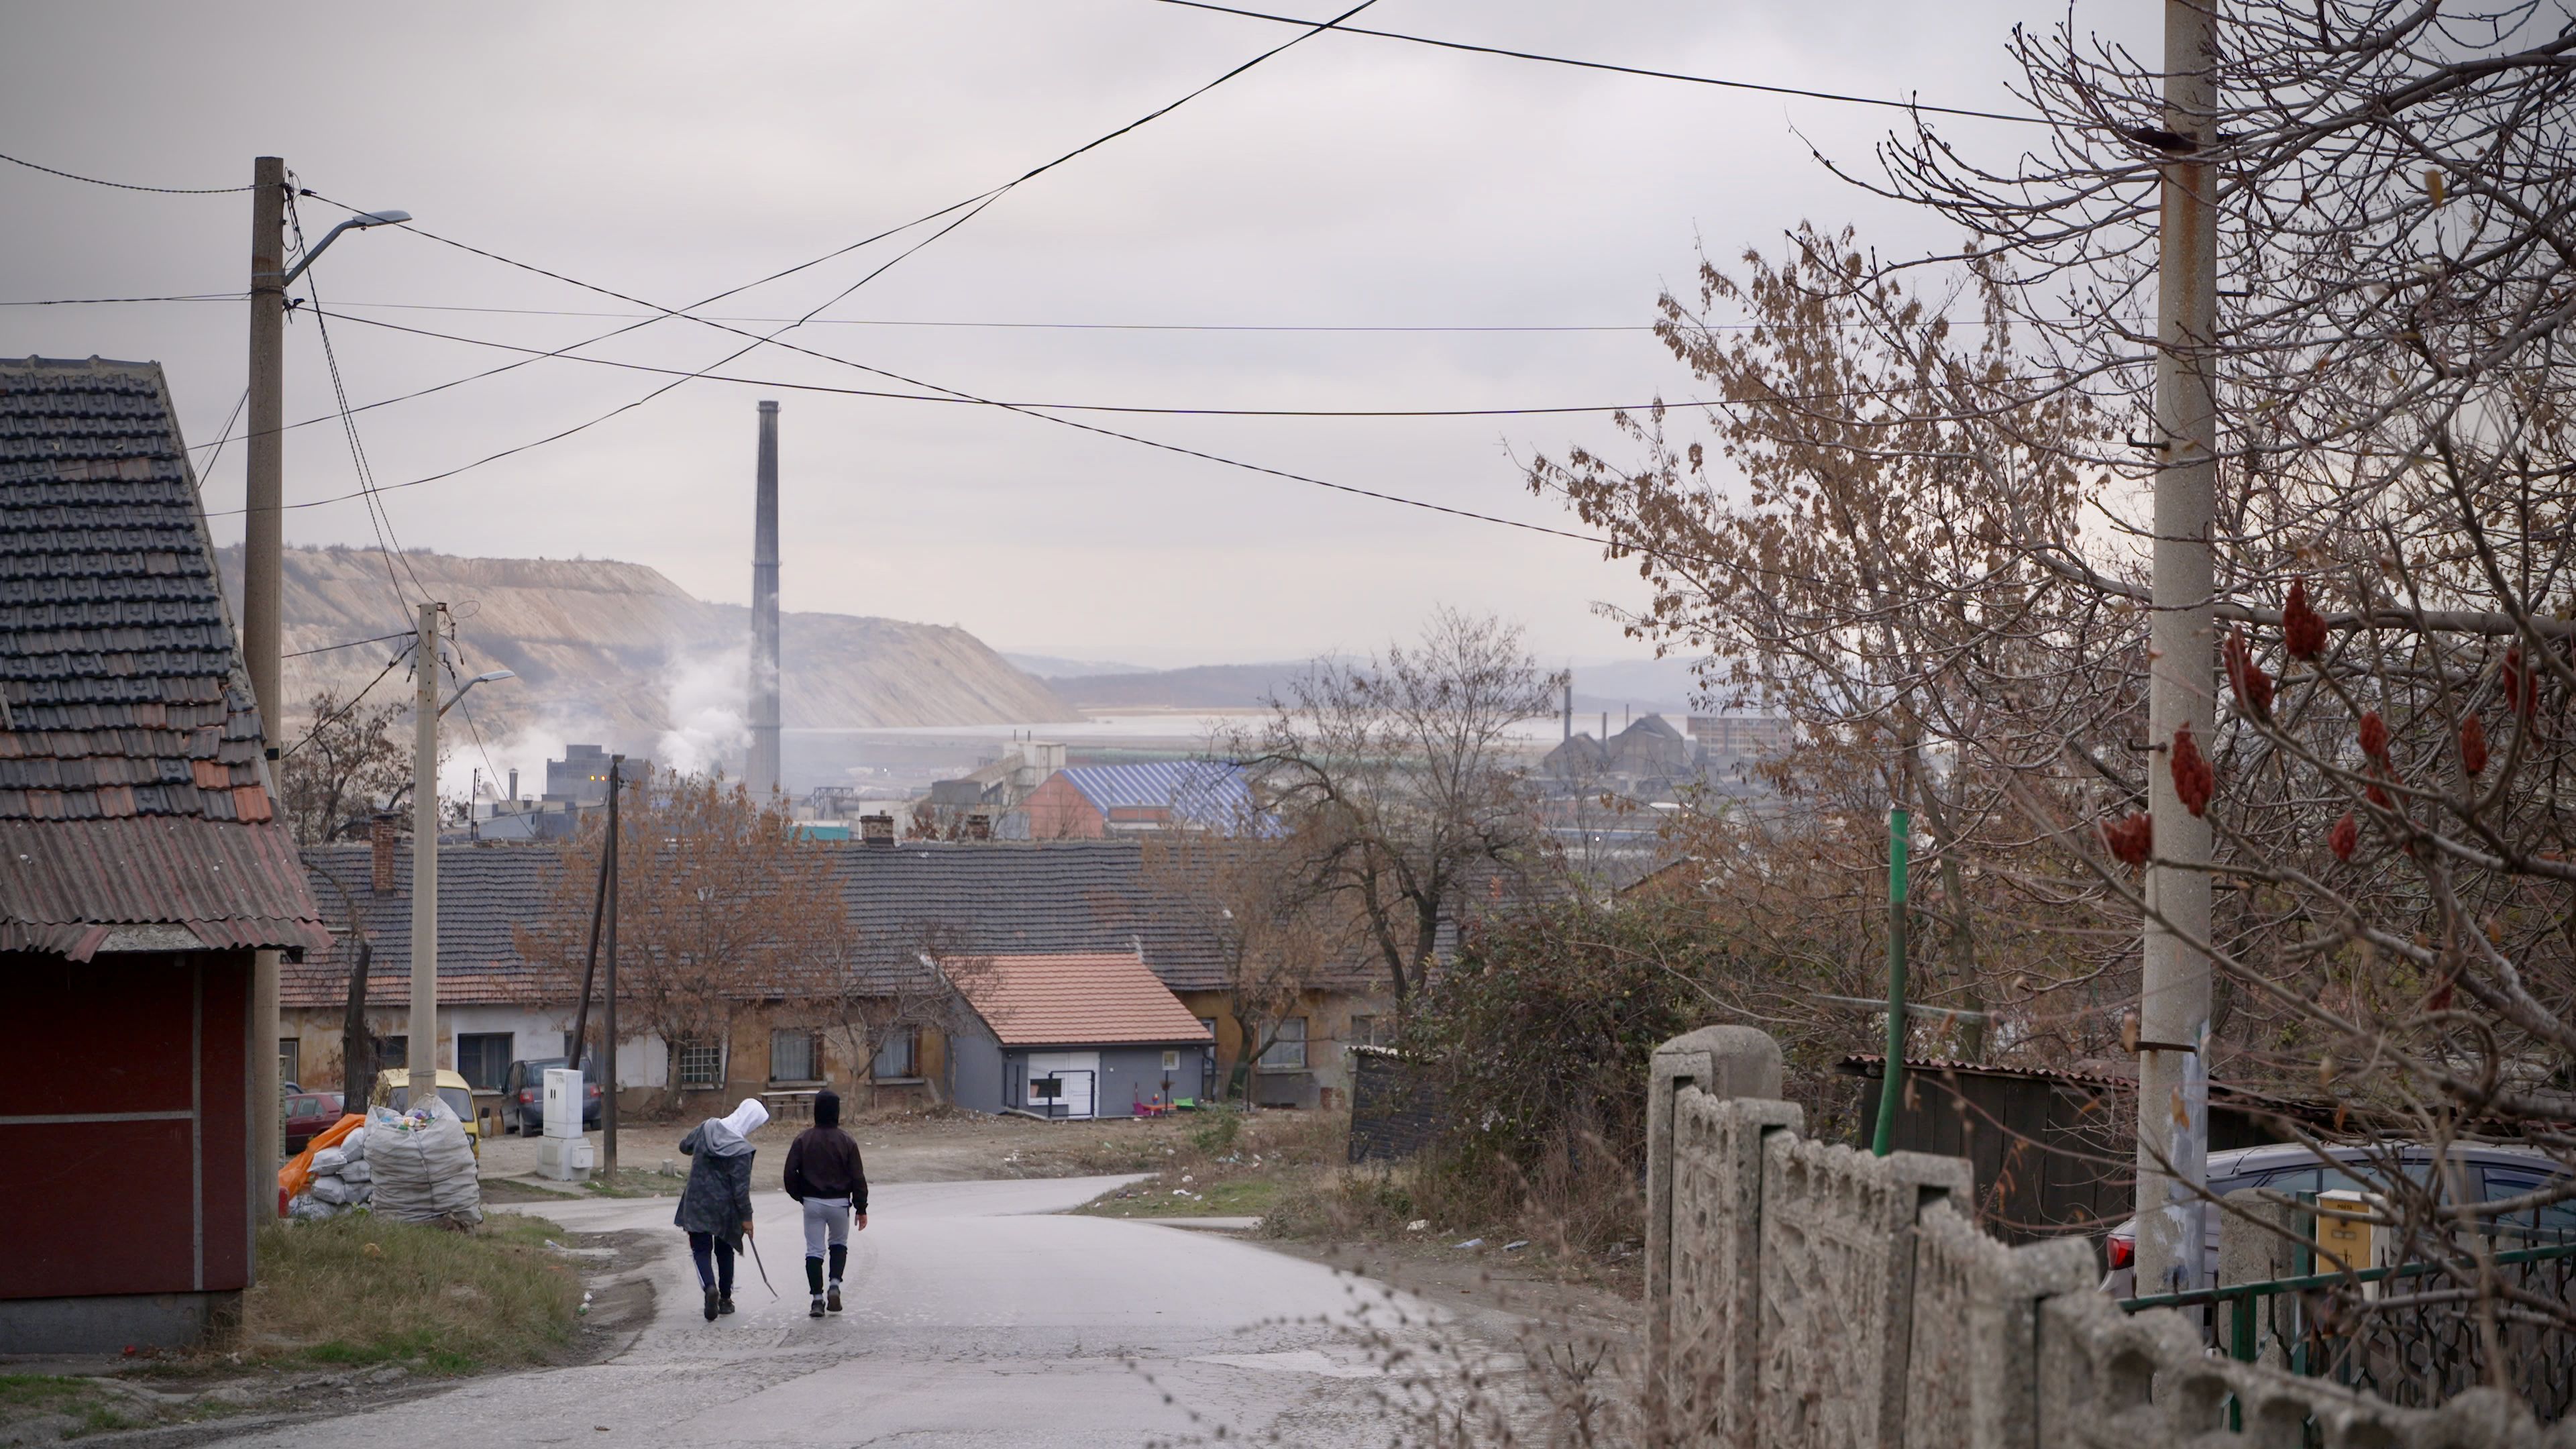  Bor, a district in Eastern Serbia, has long been mined for gold and copper.